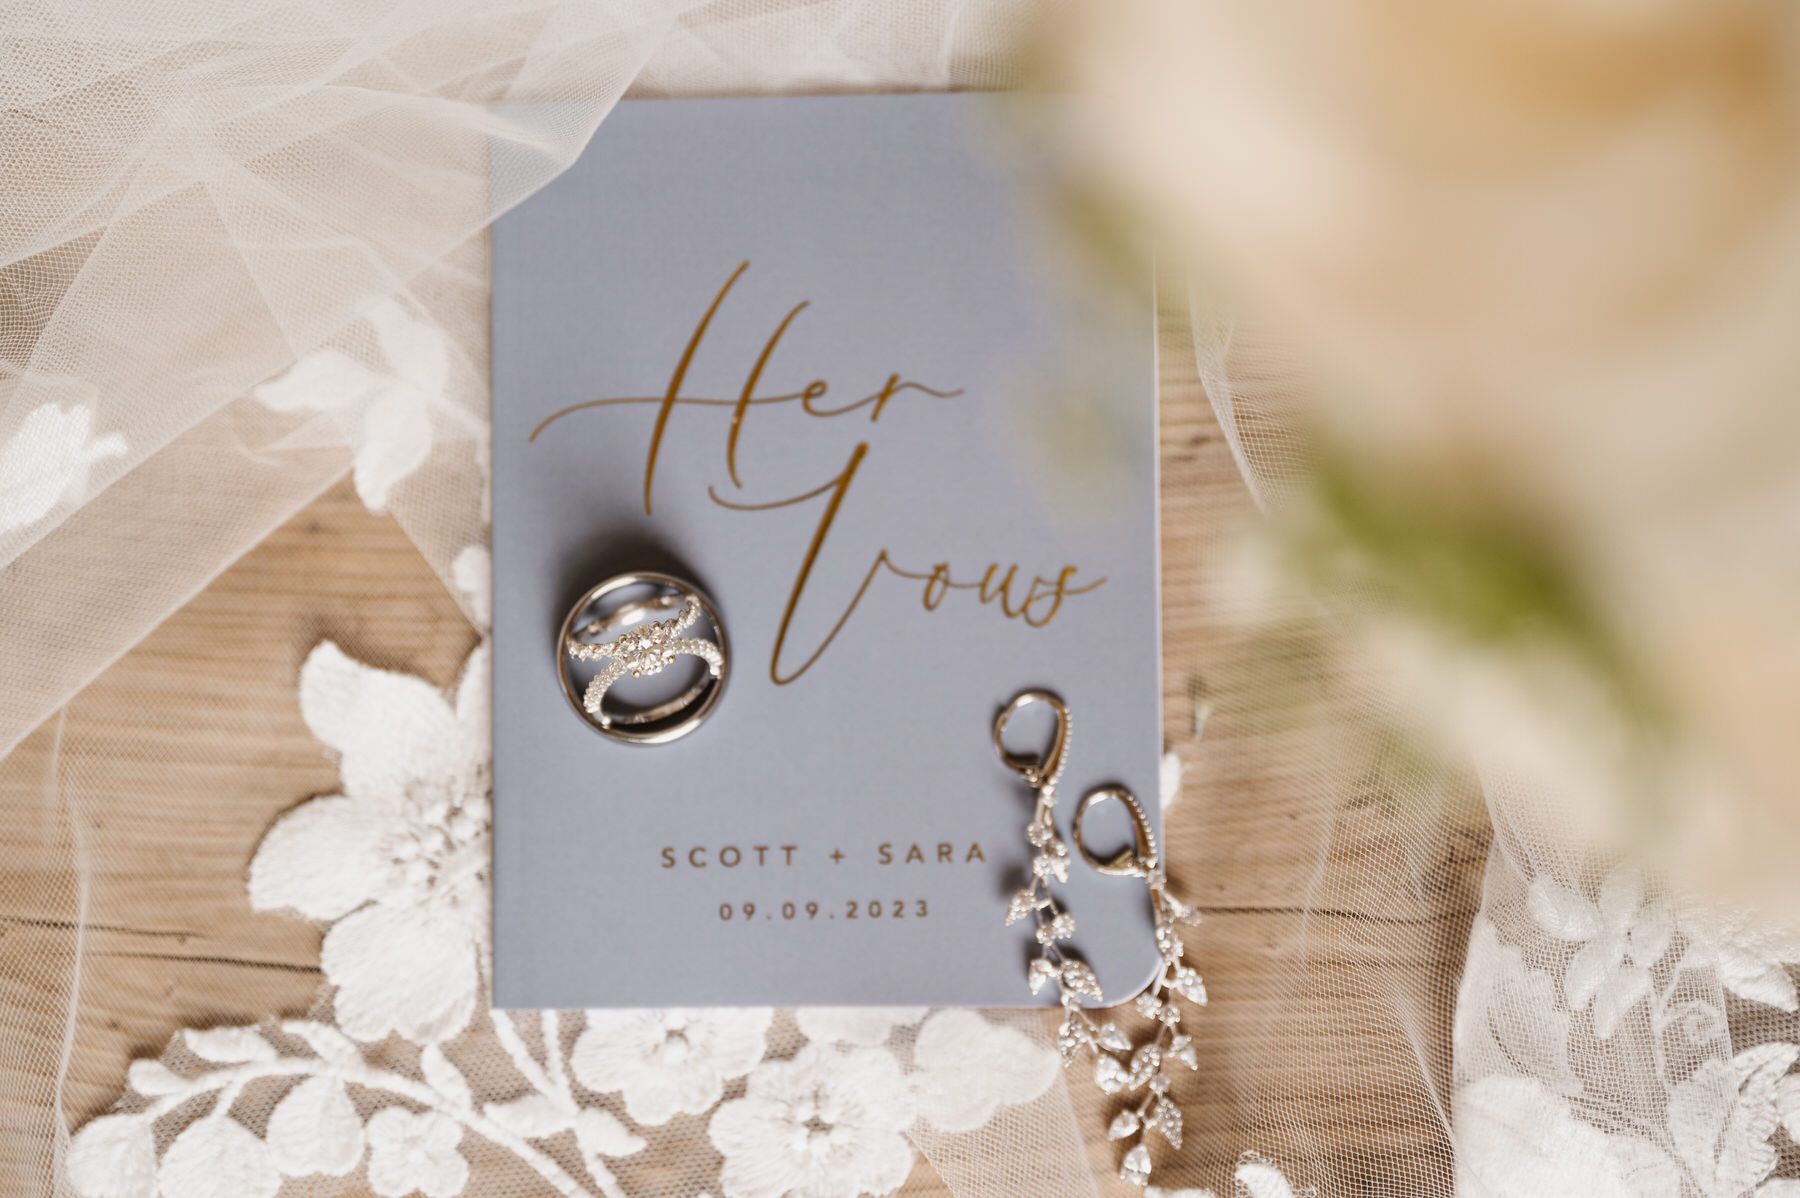 A bride and groom 's wedding rings are on a card on a wooden table.